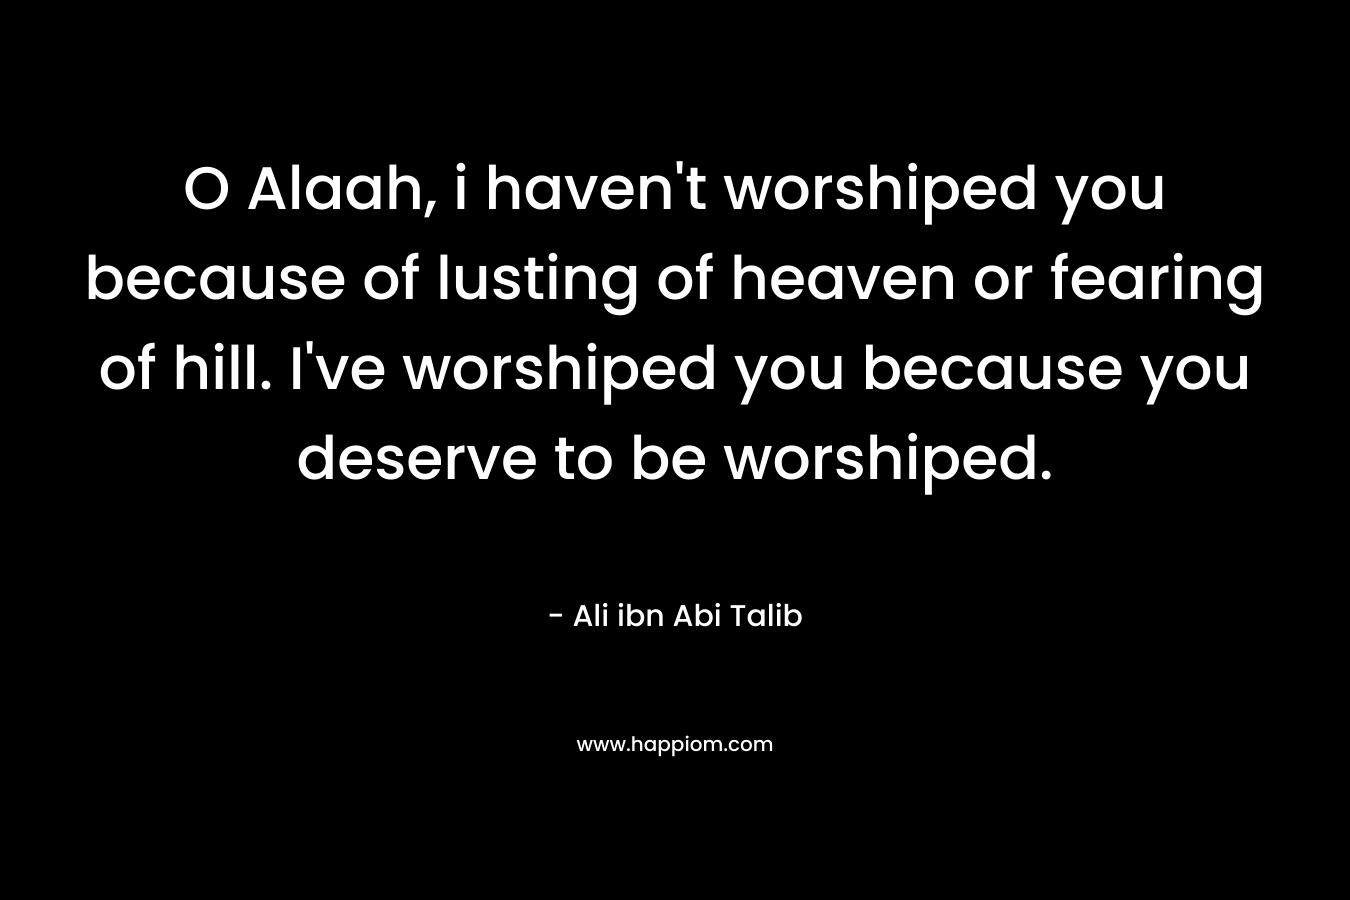 O Alaah, i haven’t worshiped you because of lusting of heaven or fearing of hill. I’ve worshiped you because you deserve to be worshiped. – Ali ibn Abi Talib